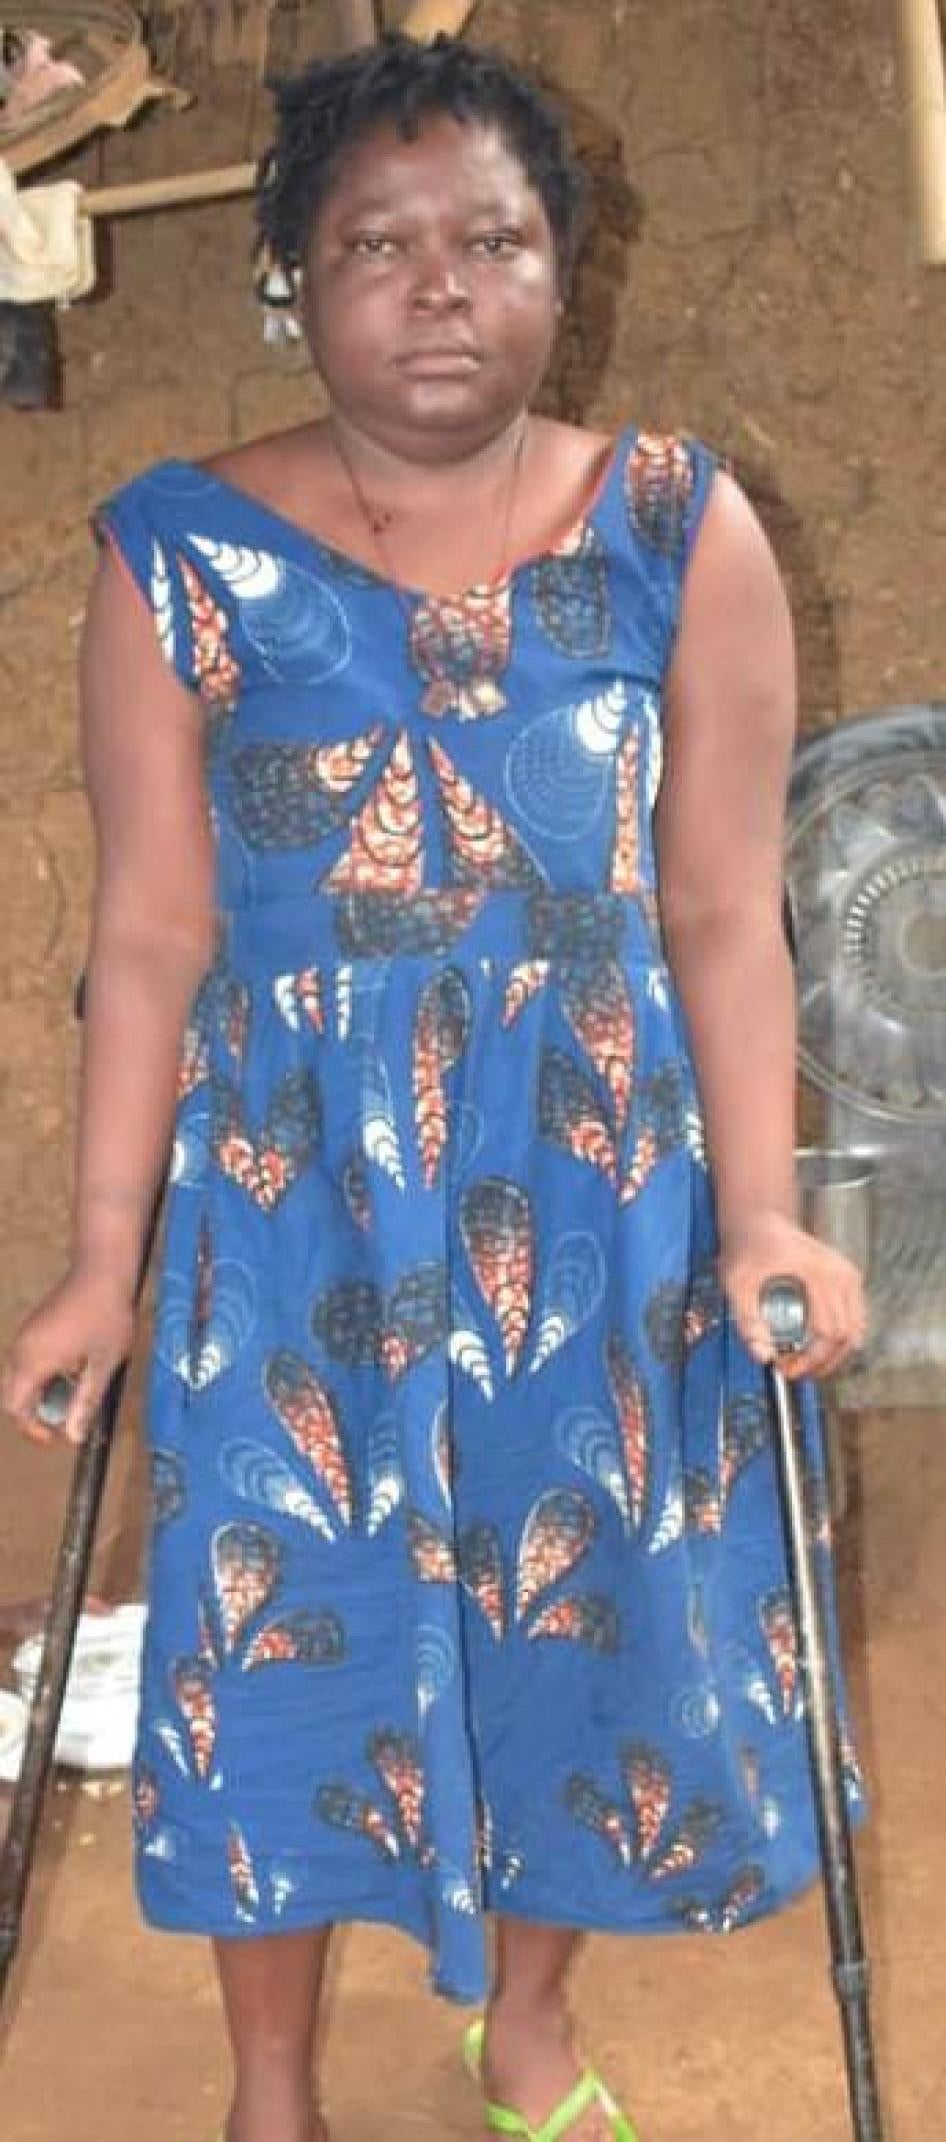 Ebai Rose Deba, 31 years old, has a physical disability and was forced to flee her village in the South-West region of Cameroon in February 2019 following violence. May 18, 2019.